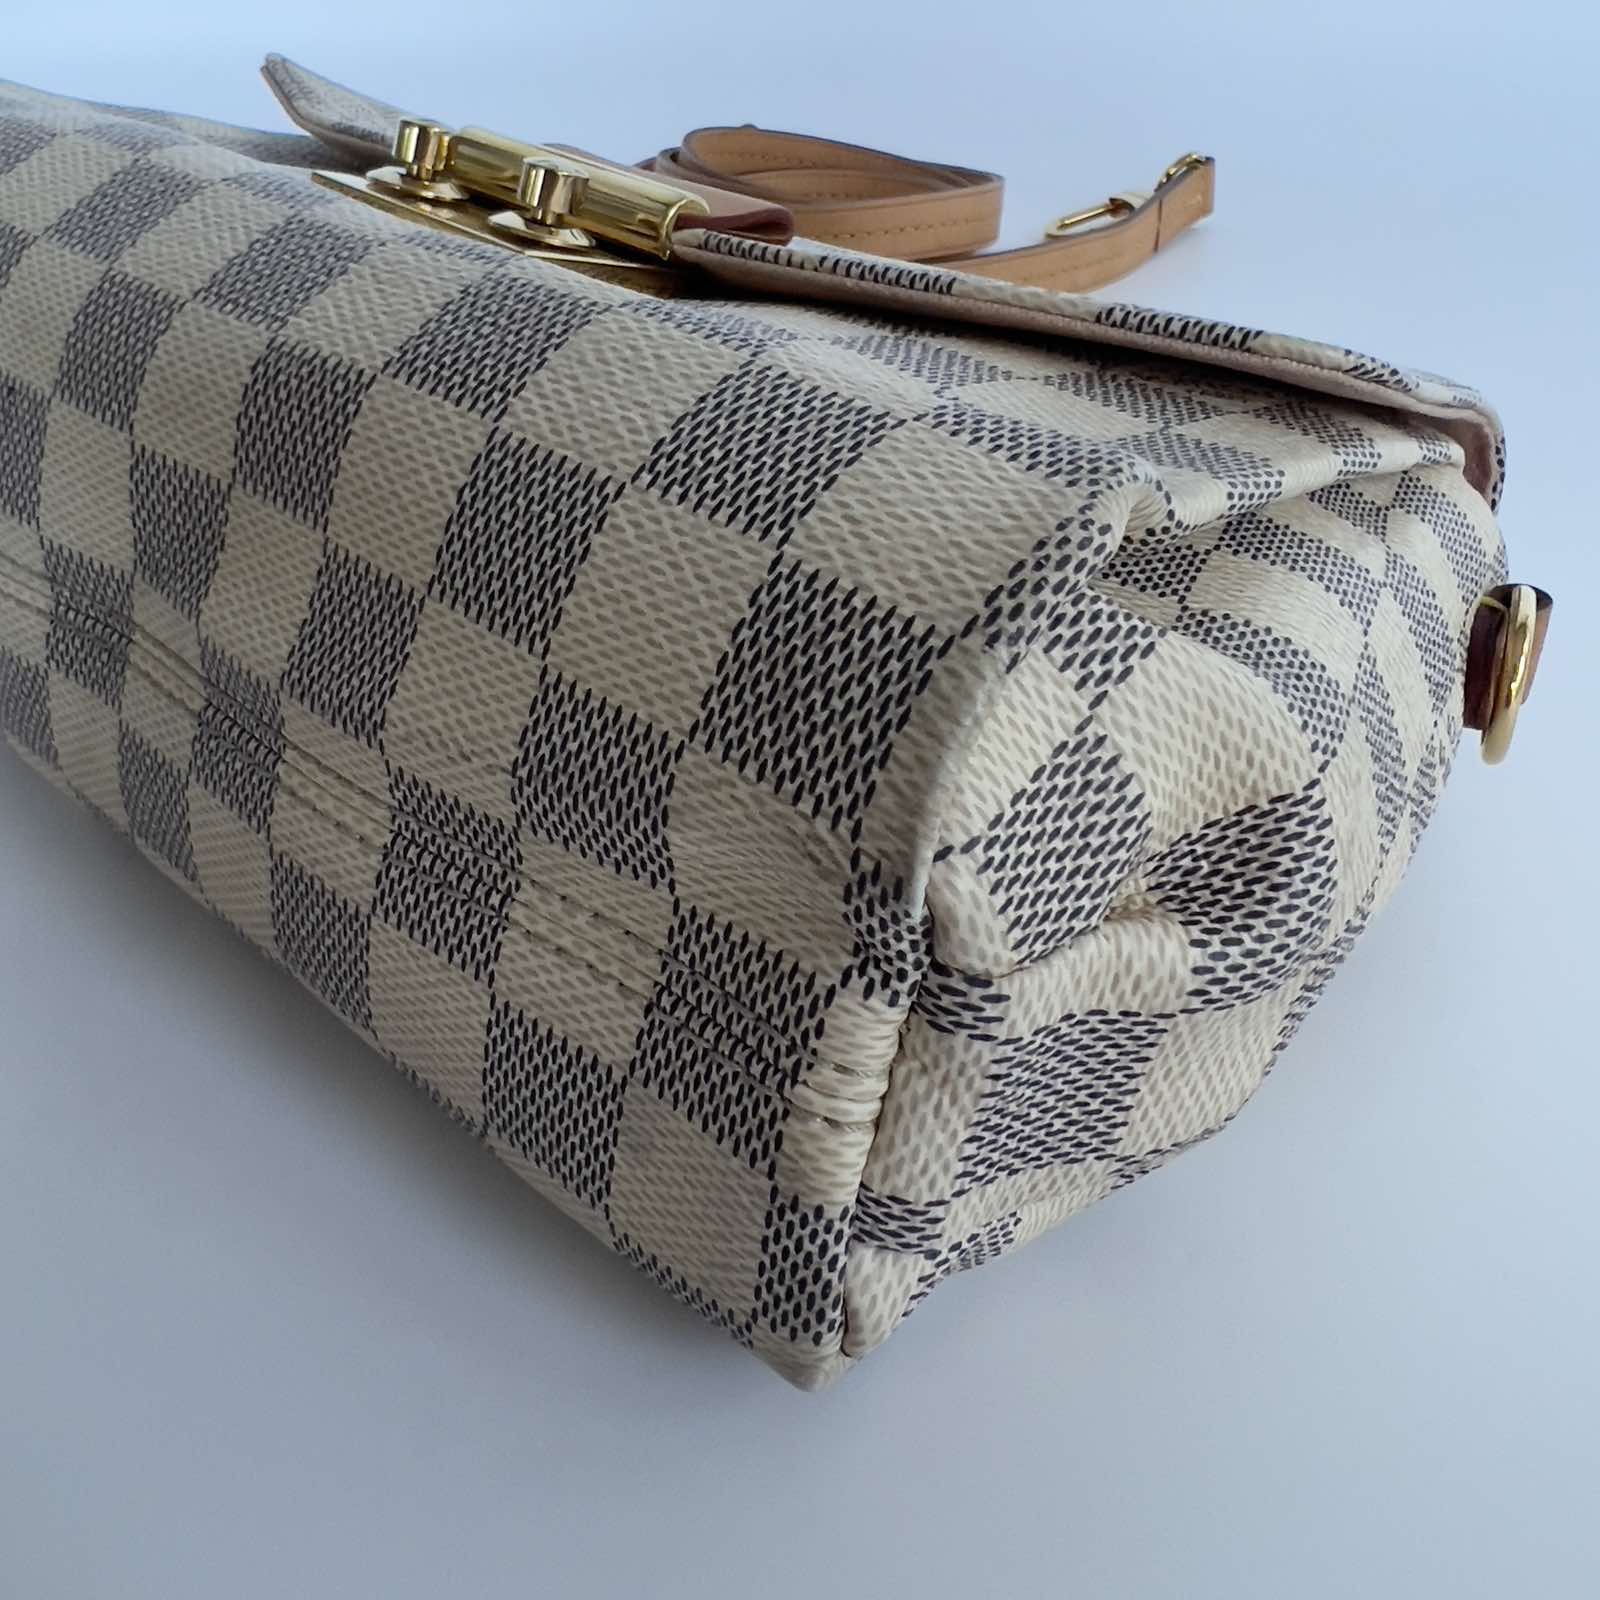 Louis Vuitton Damier Azur Croisette. DC: TR4117. Made in France. With long  strap & dustbag ❤️